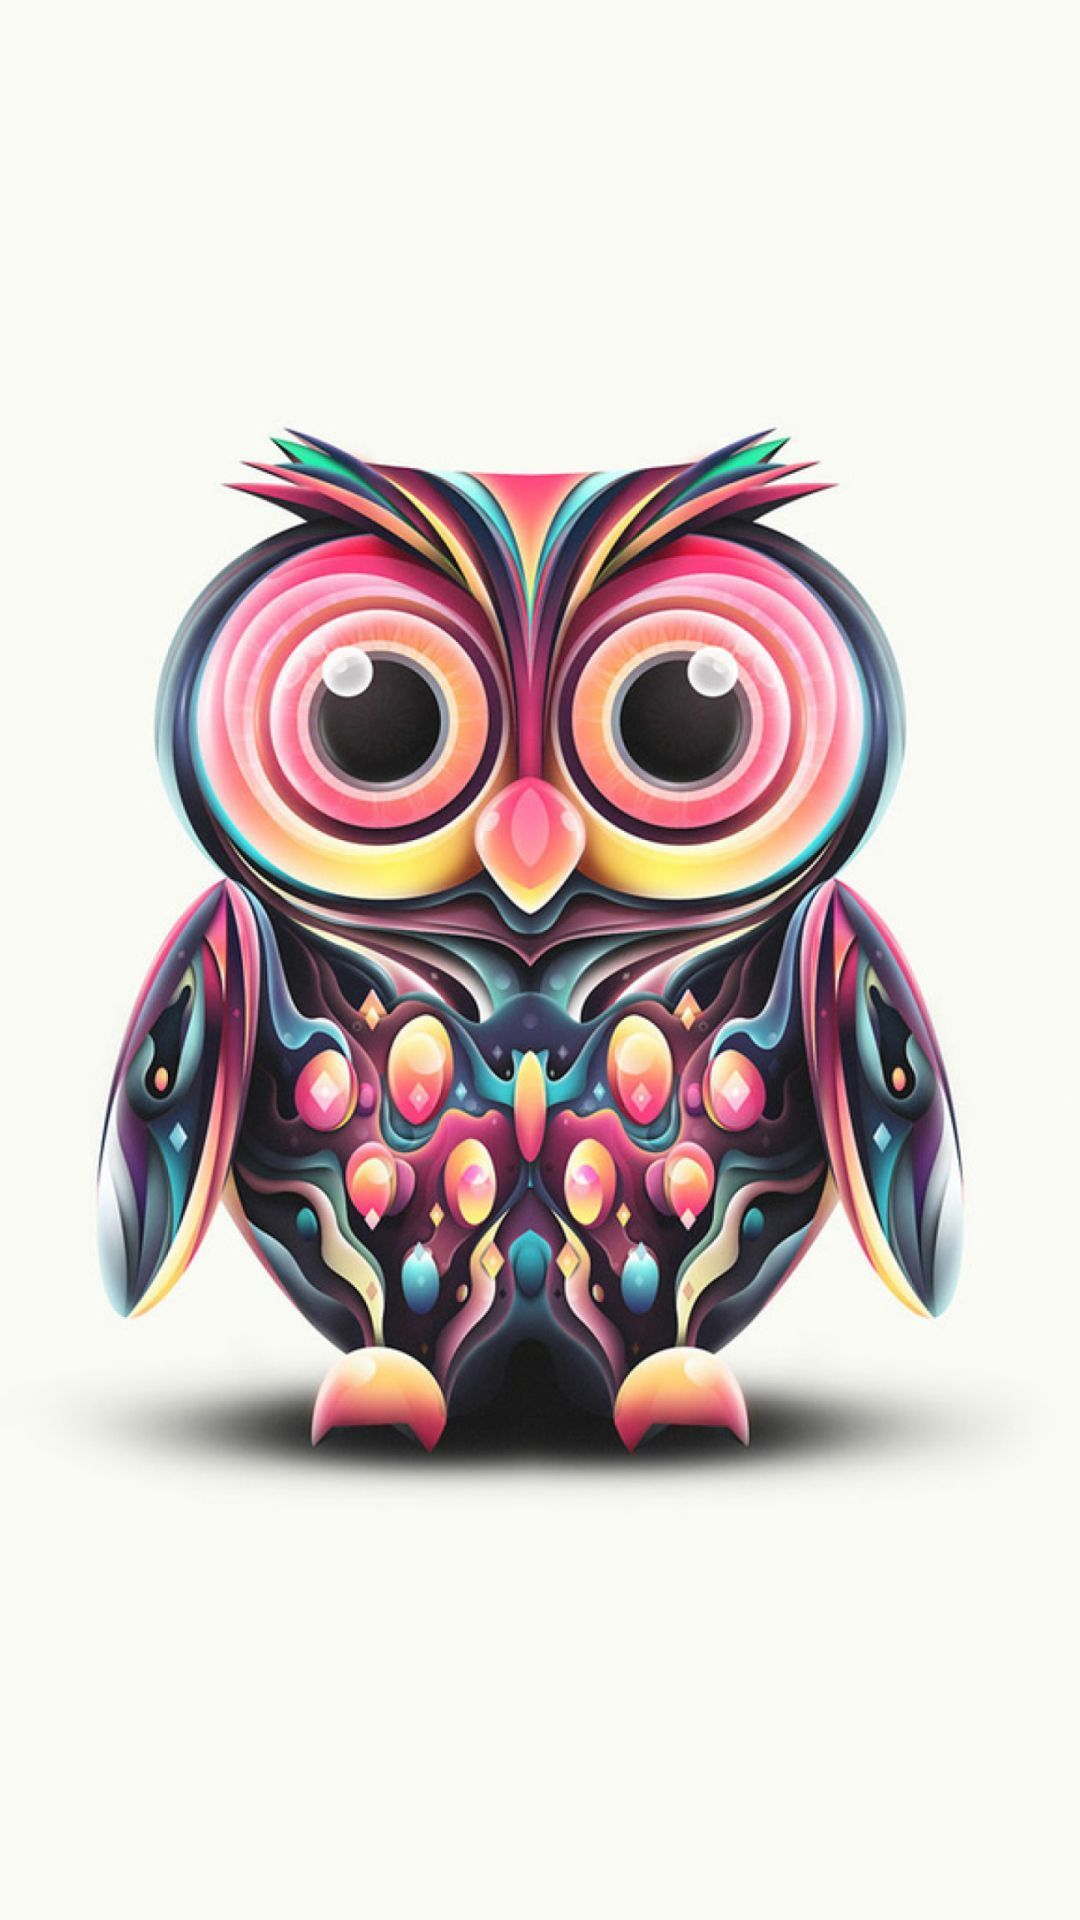 1080x1920 Cute Owl Android, iPhone, Desktop HD Backgrounds / Wallpapers (1080p, 4k) (104700) #hdwallpapers #androidwal&acirc;&#128;&brvbar; | Owl wallpaper, Cute owls wallpaper, Colorful owls